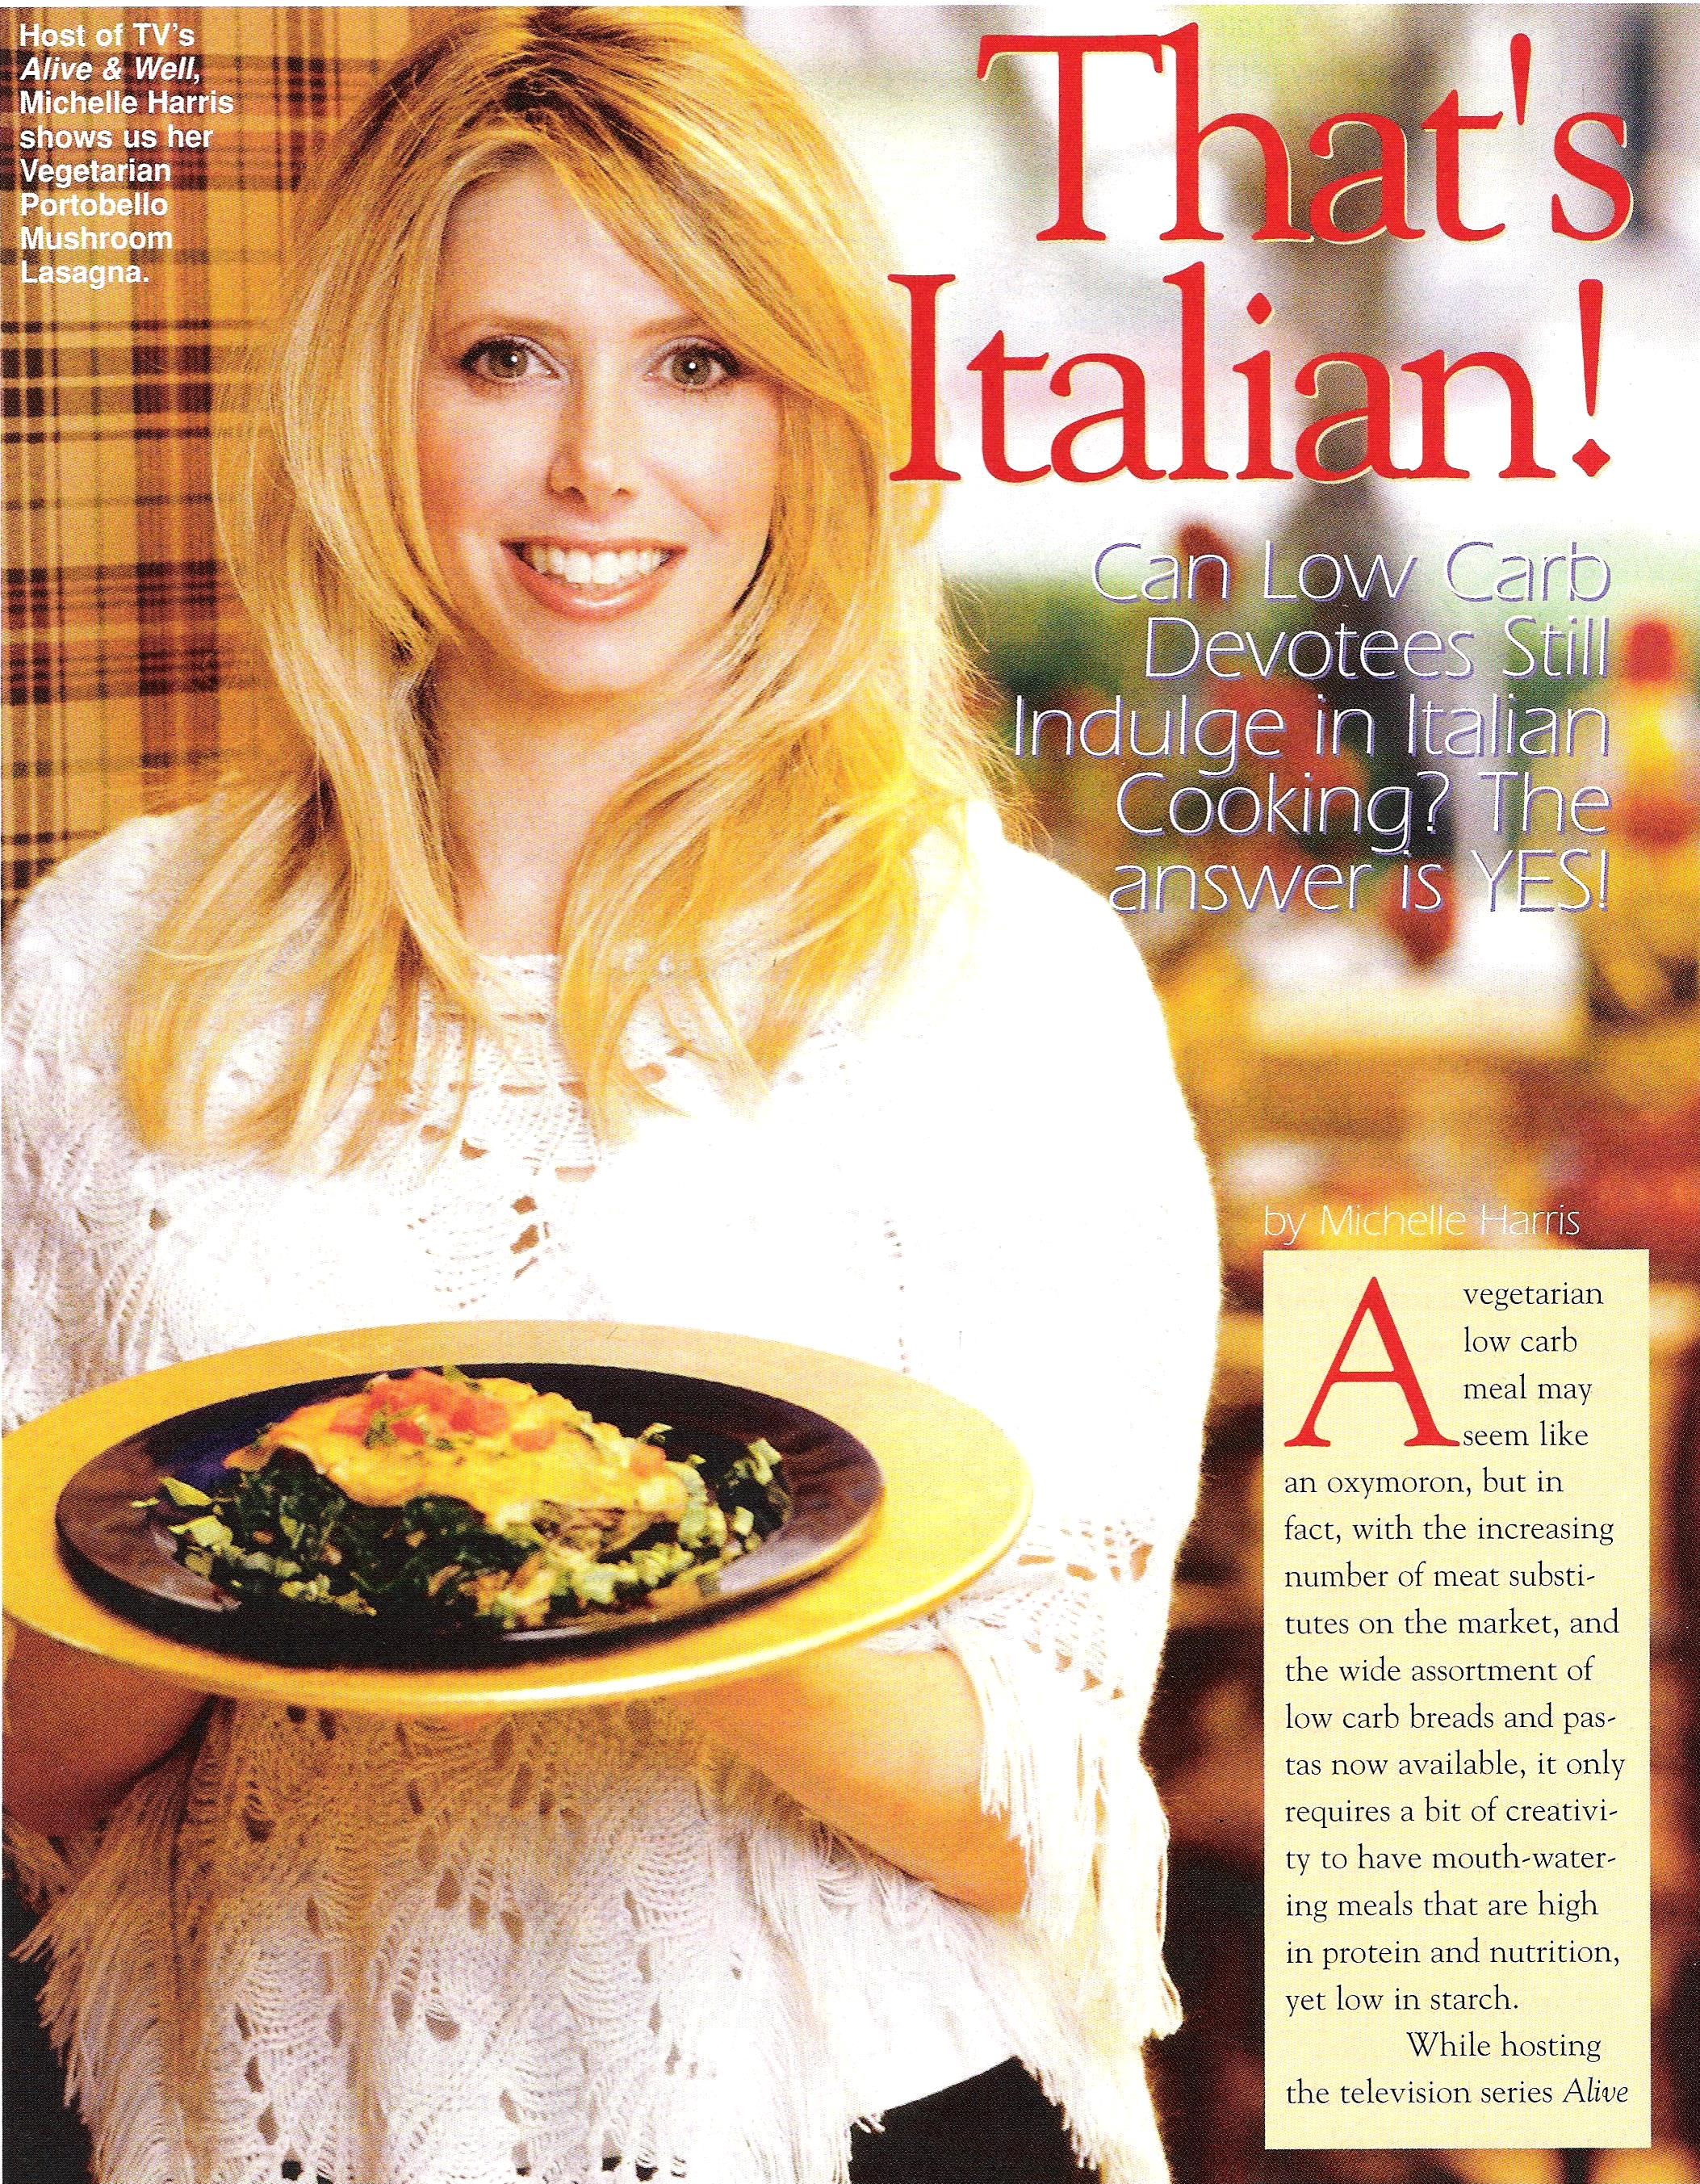 Michelle Harris of Alive and Well TV Show in That's Italian magazine